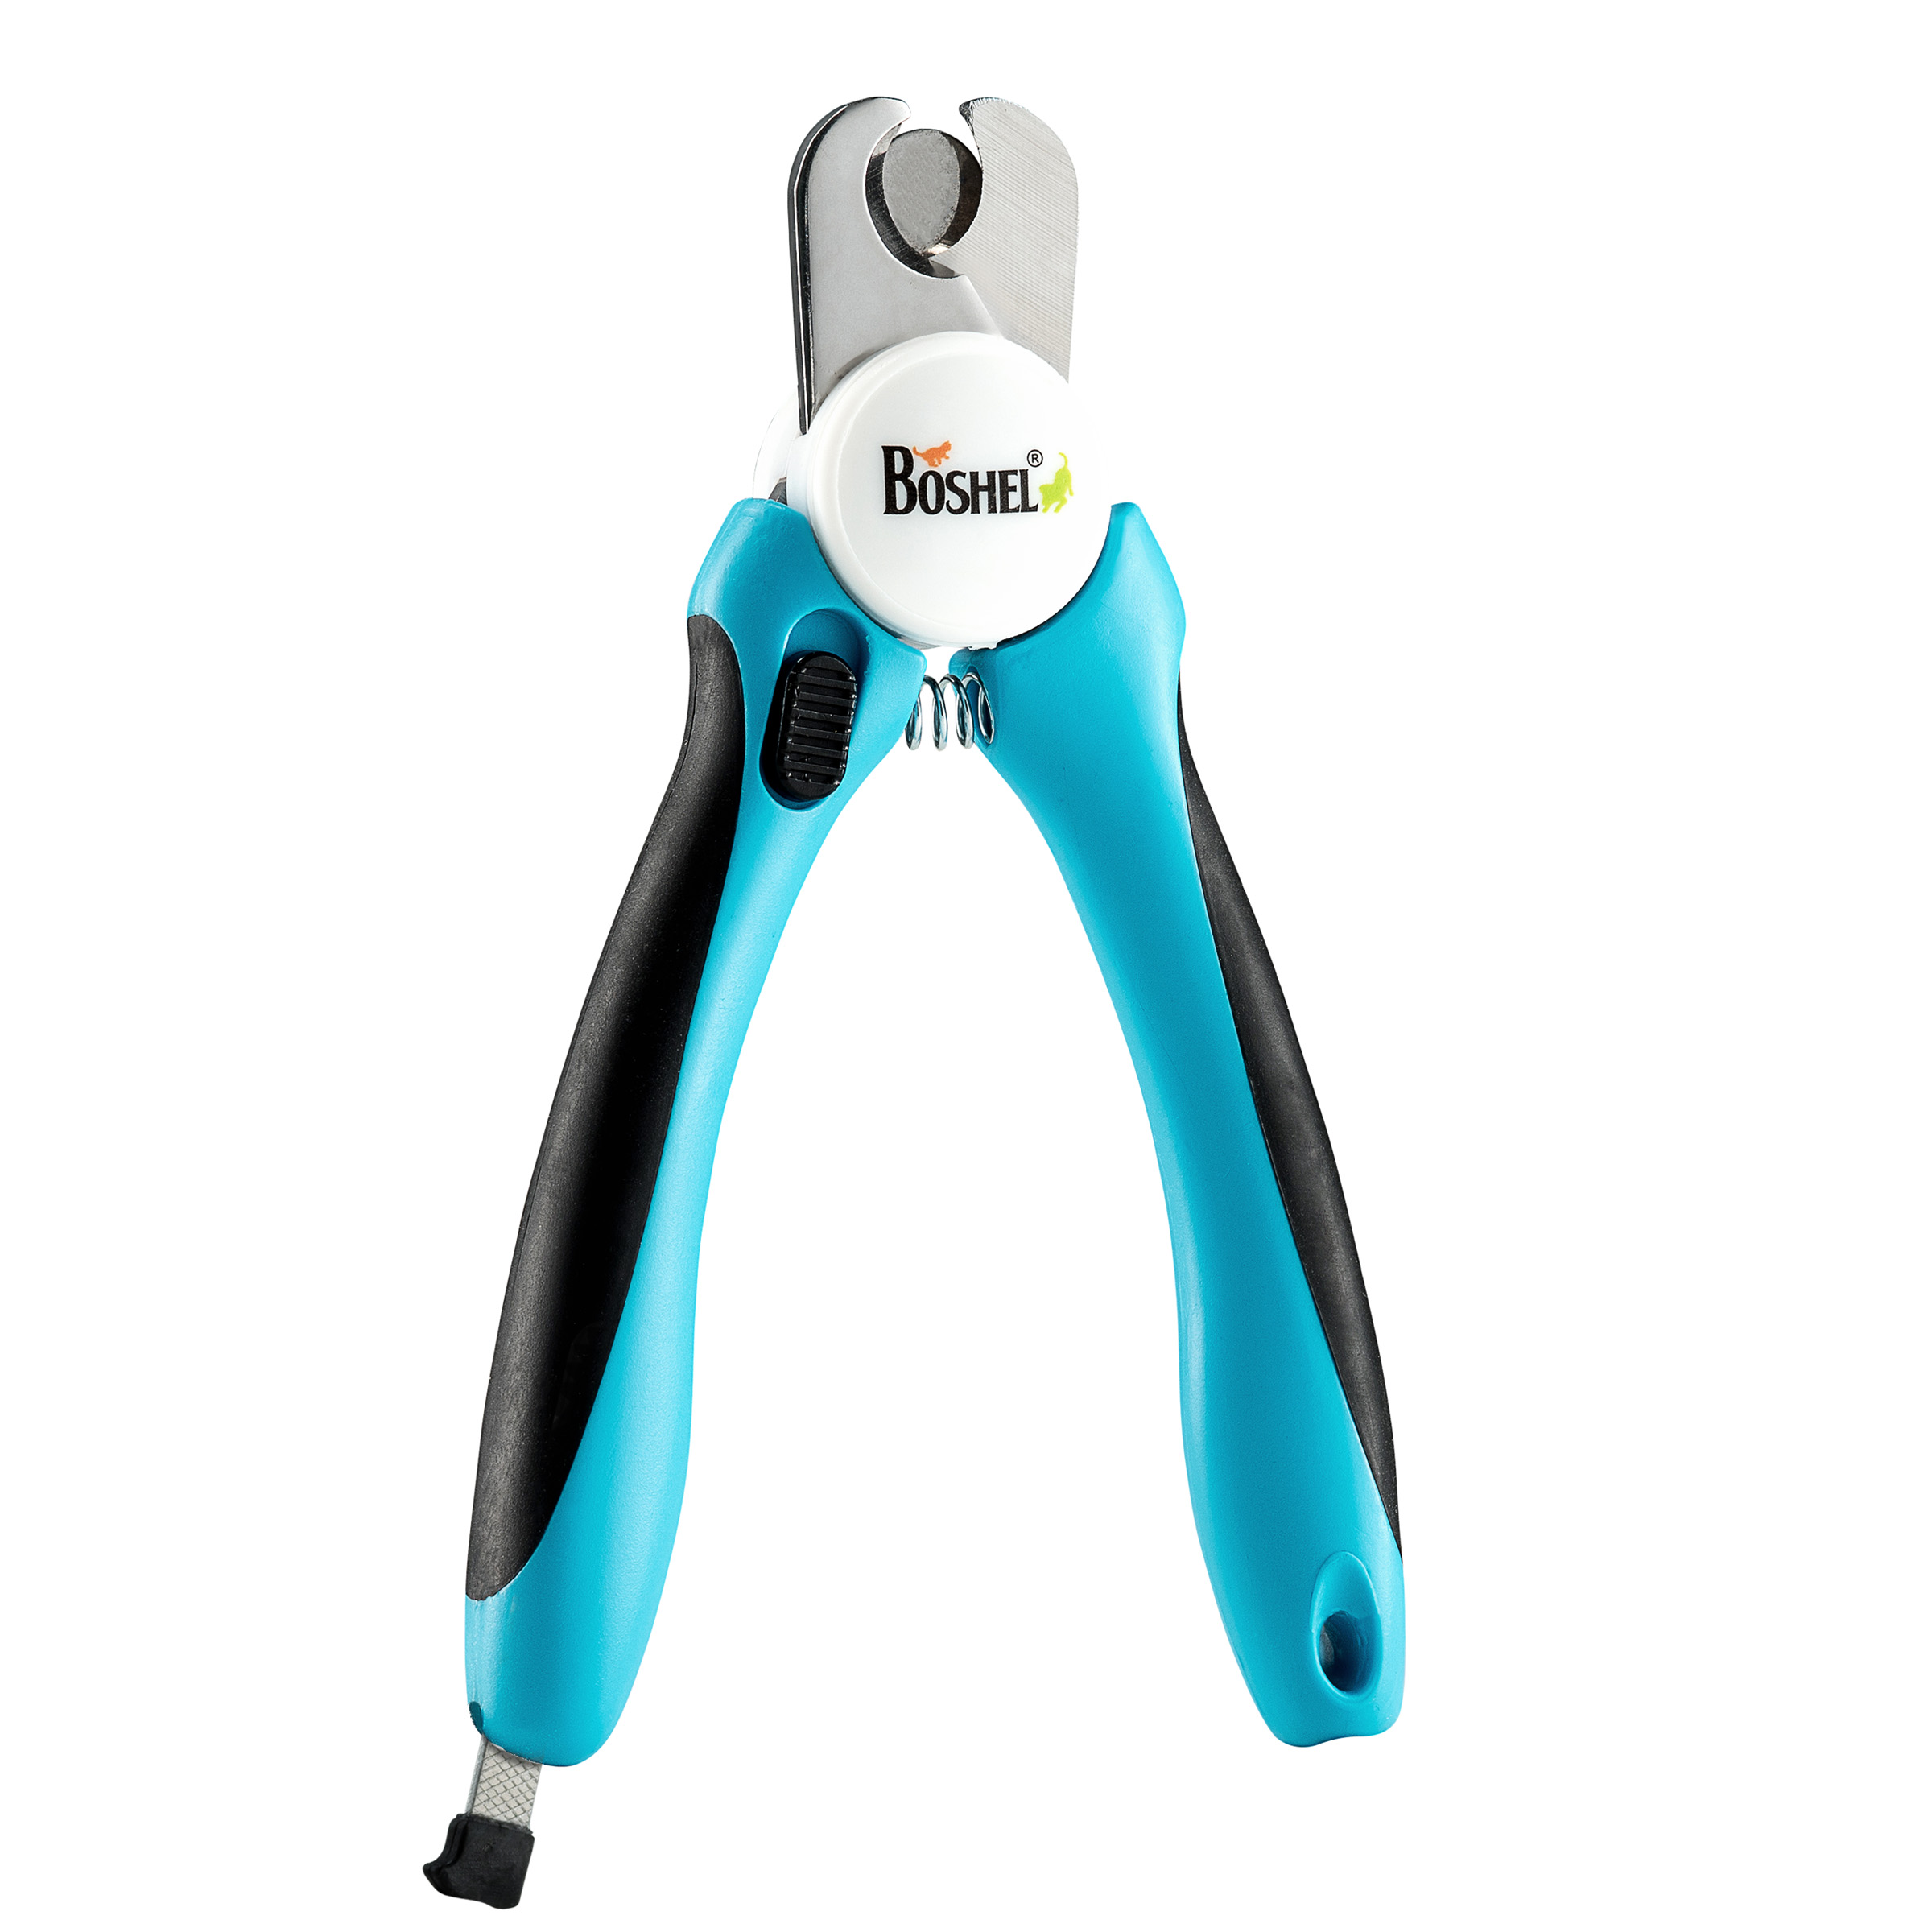 BOSHEL Dog Nail Clippers and Trimmer with Safety Guard to Avoid over-Cutting Nails & Free Nail File, Blue - image 4 of 9